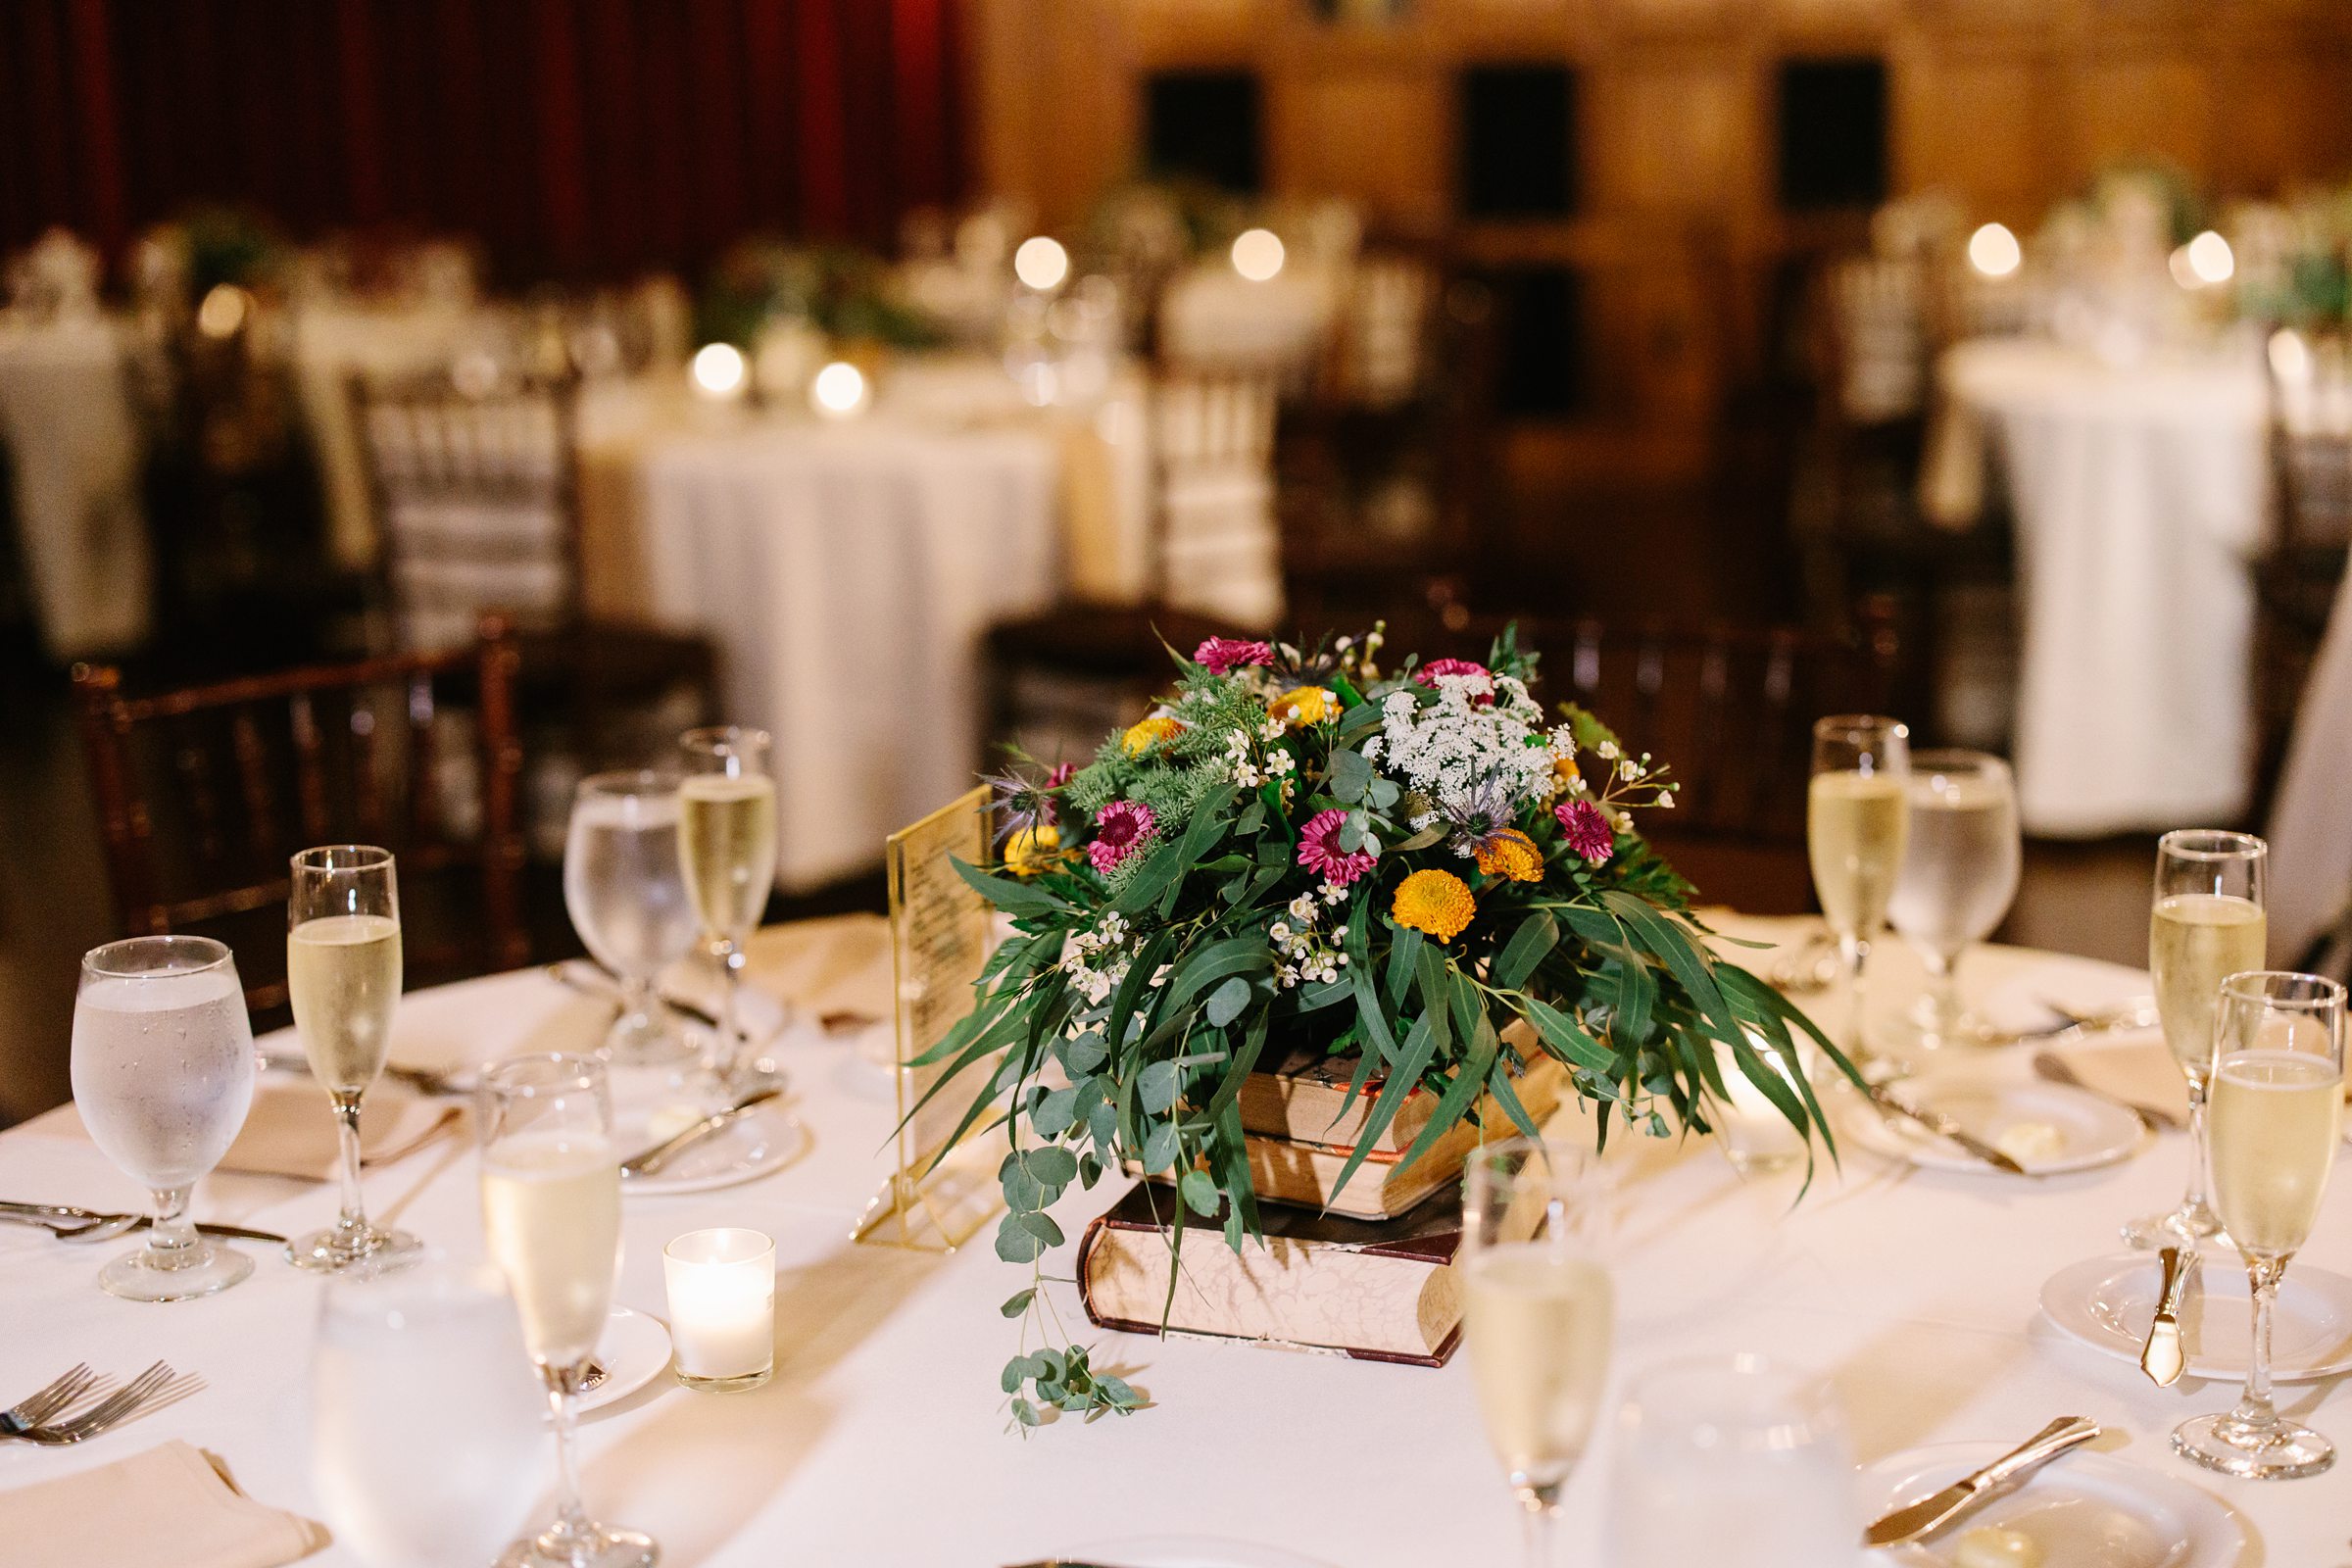 Table setting details of the reception at the Gem Theater Wedding by Detroit Wedding Photographer Michele Maloney